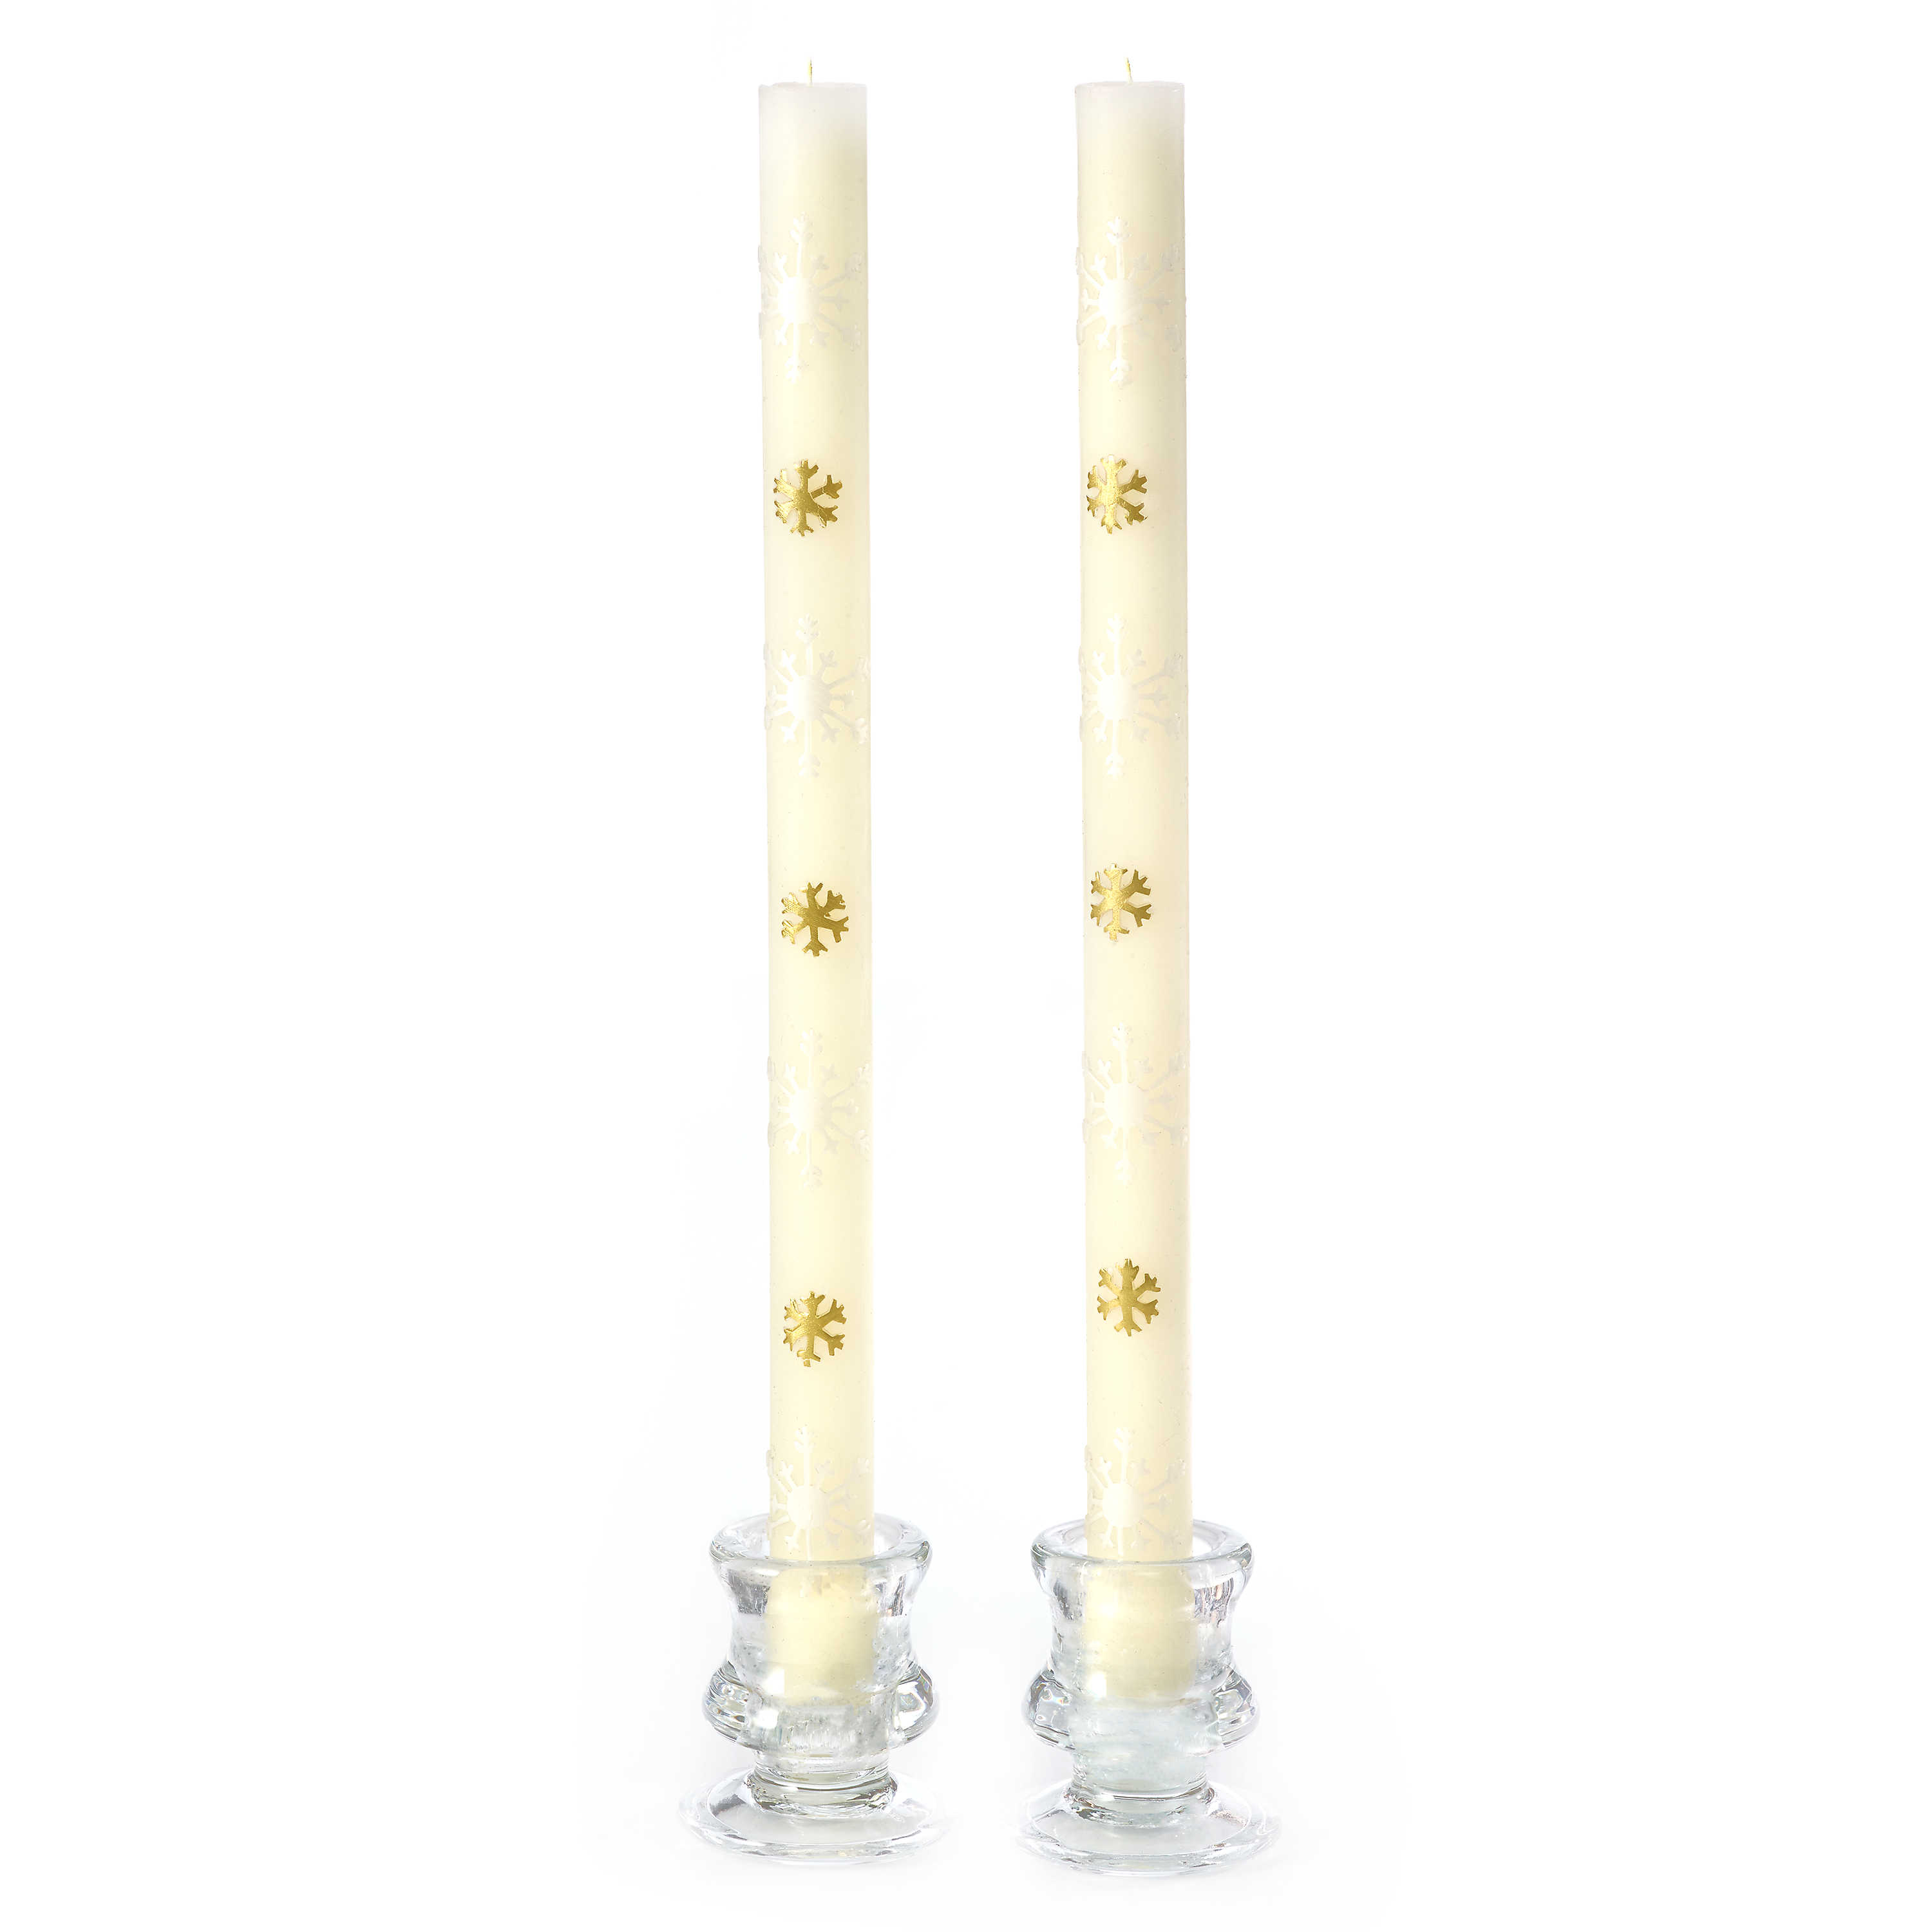 Snowflake Dinner Candles - Gold & Pearl - Set of 2 mackenzie-childs Panama 0